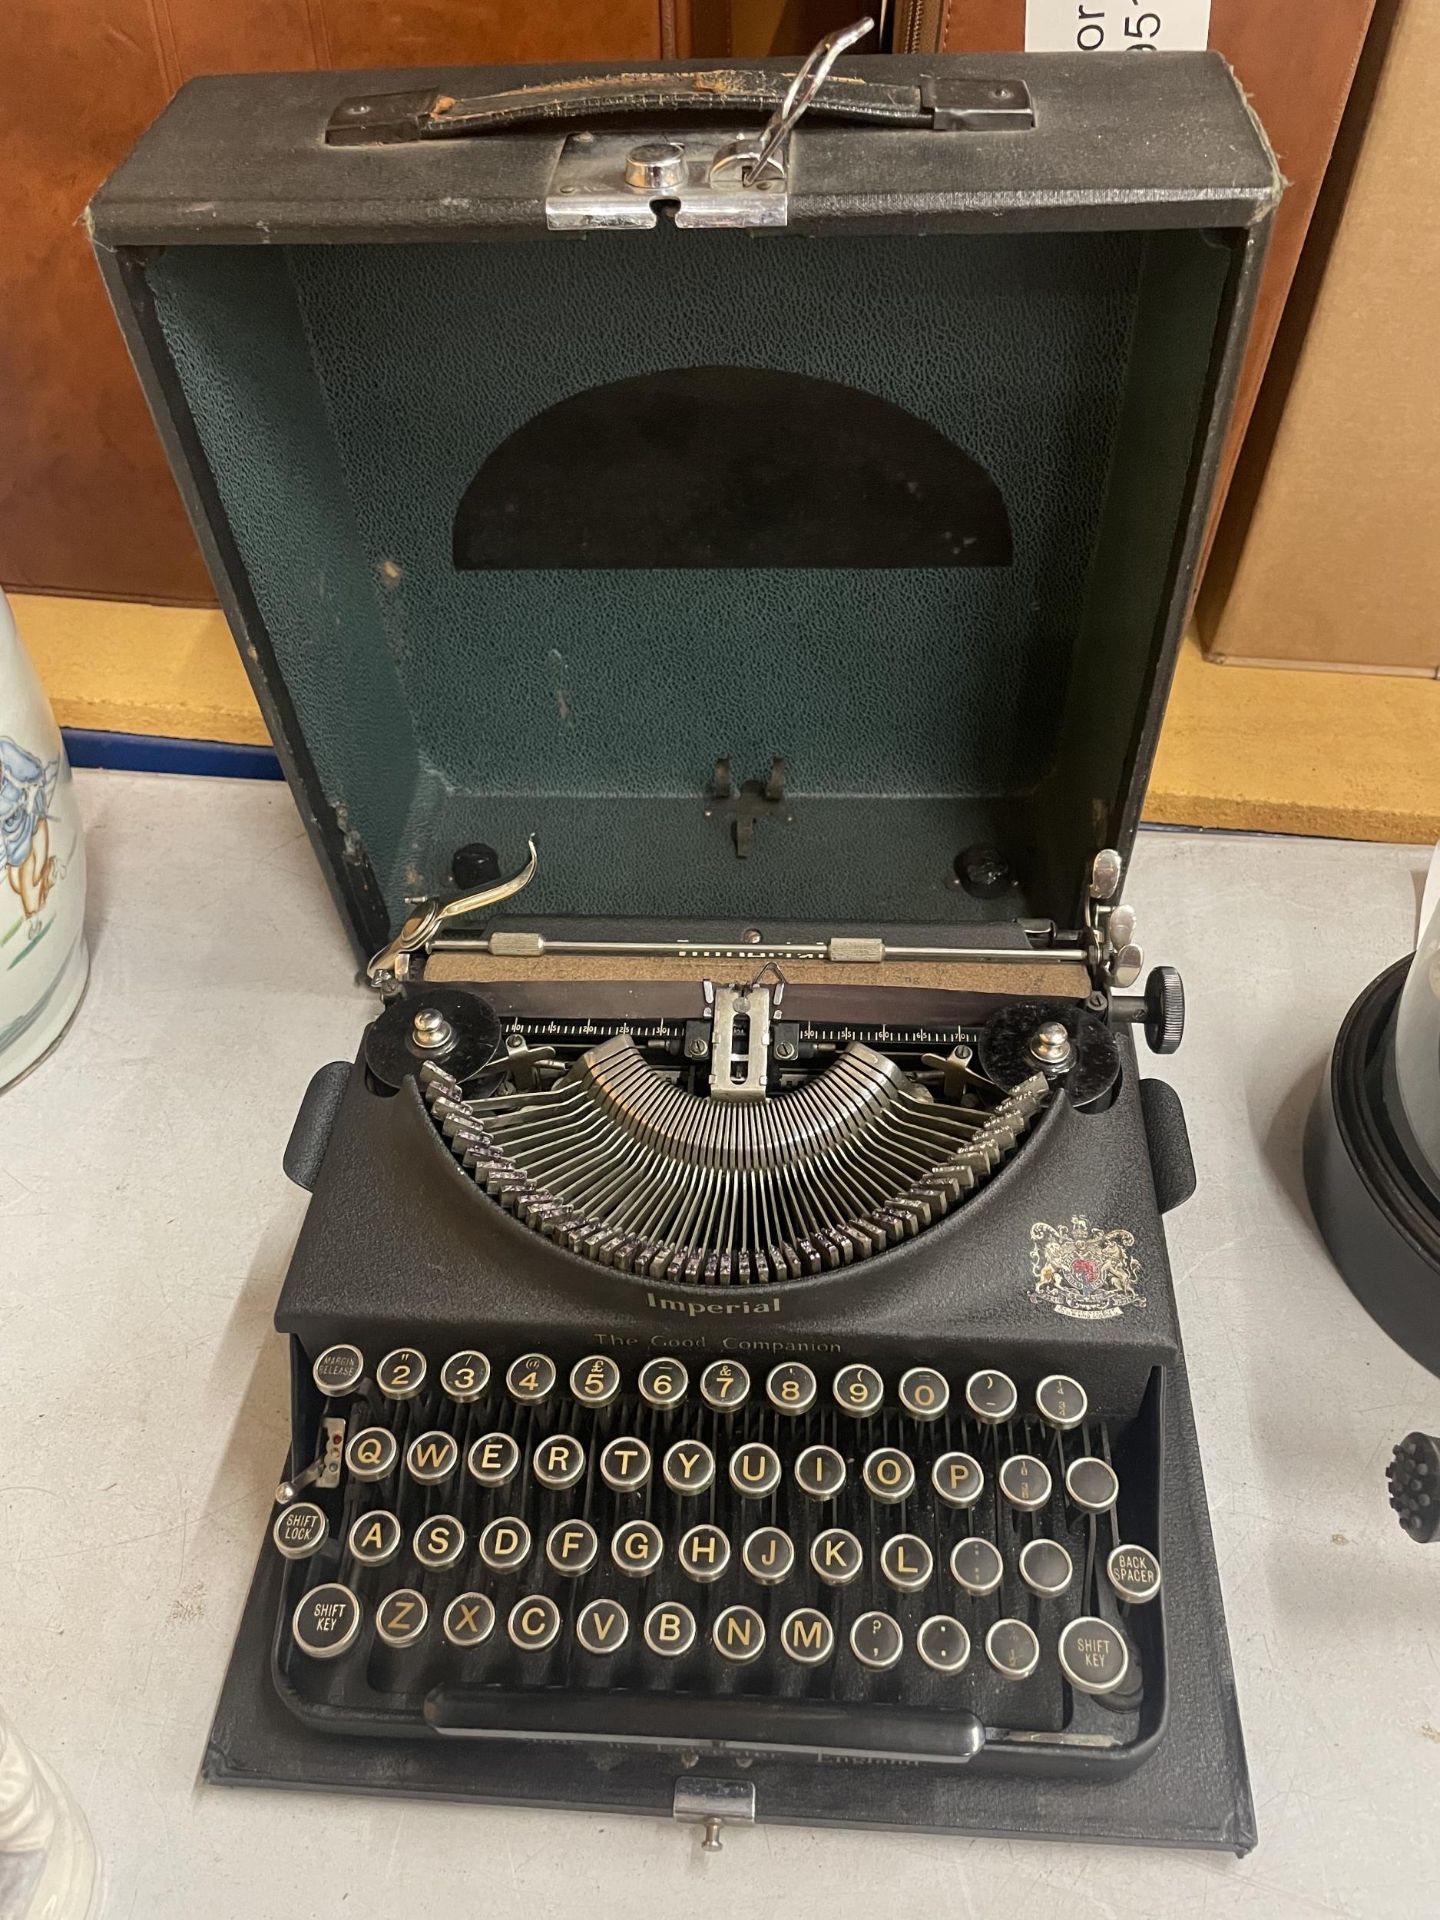 A VINTAGE CASED IMPERIAL THE GRAND COMPANION TYPEWRITER